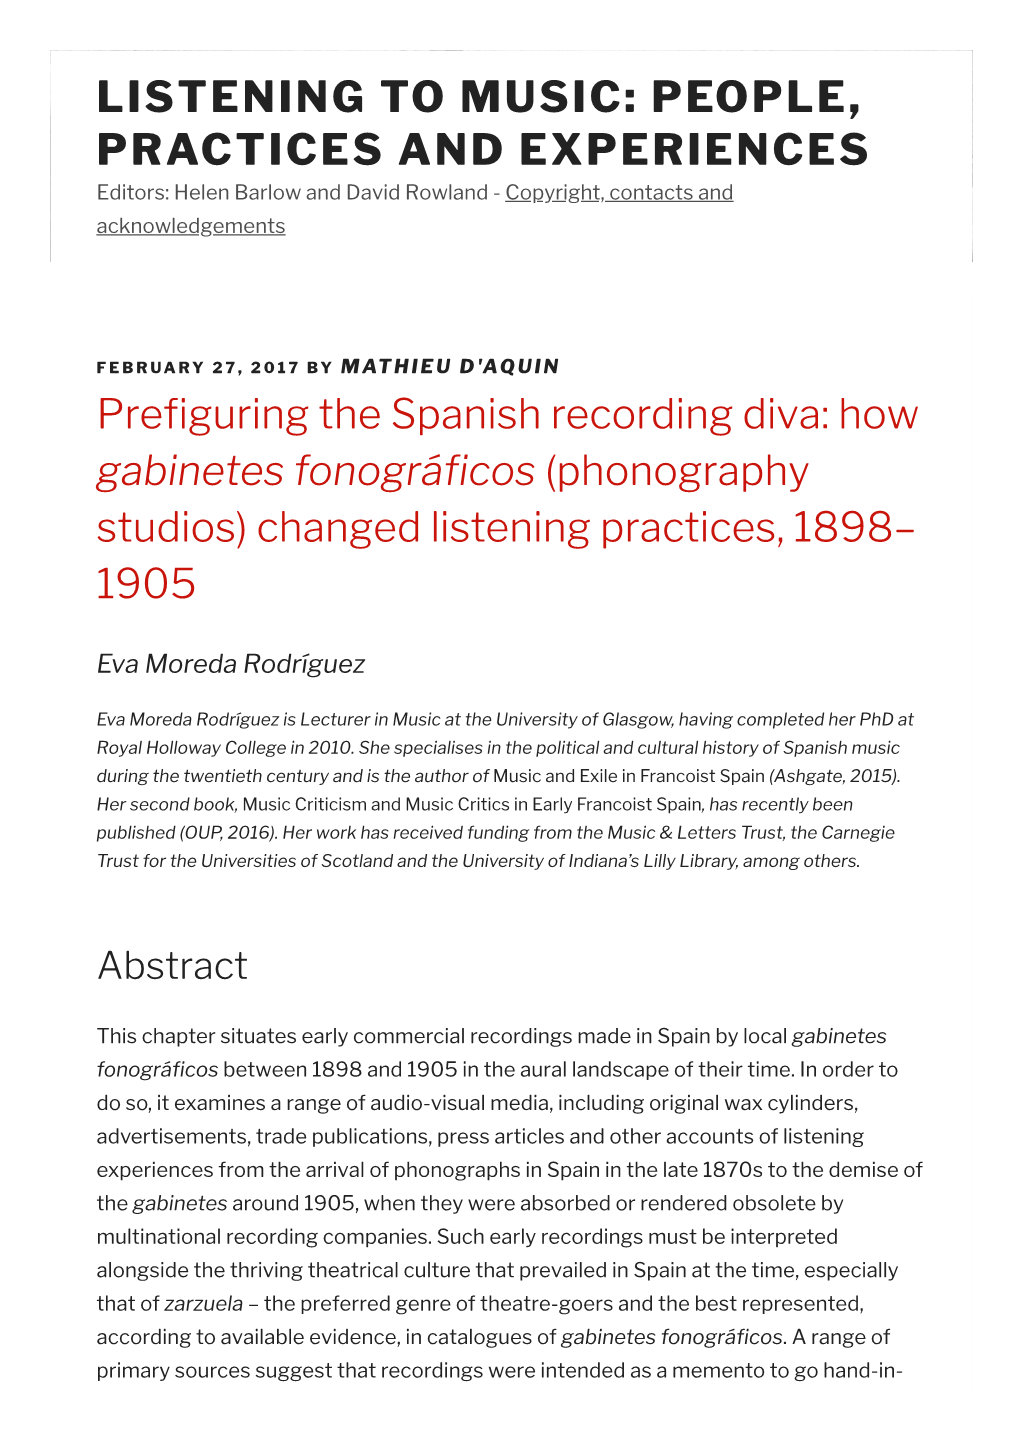 LISTENING to MUSIC: PEOPLE, PRACTICES and EXPERIENCES Editors: Helen Barlow and David Rowland - Copyright, Contacts and Acknowledgements